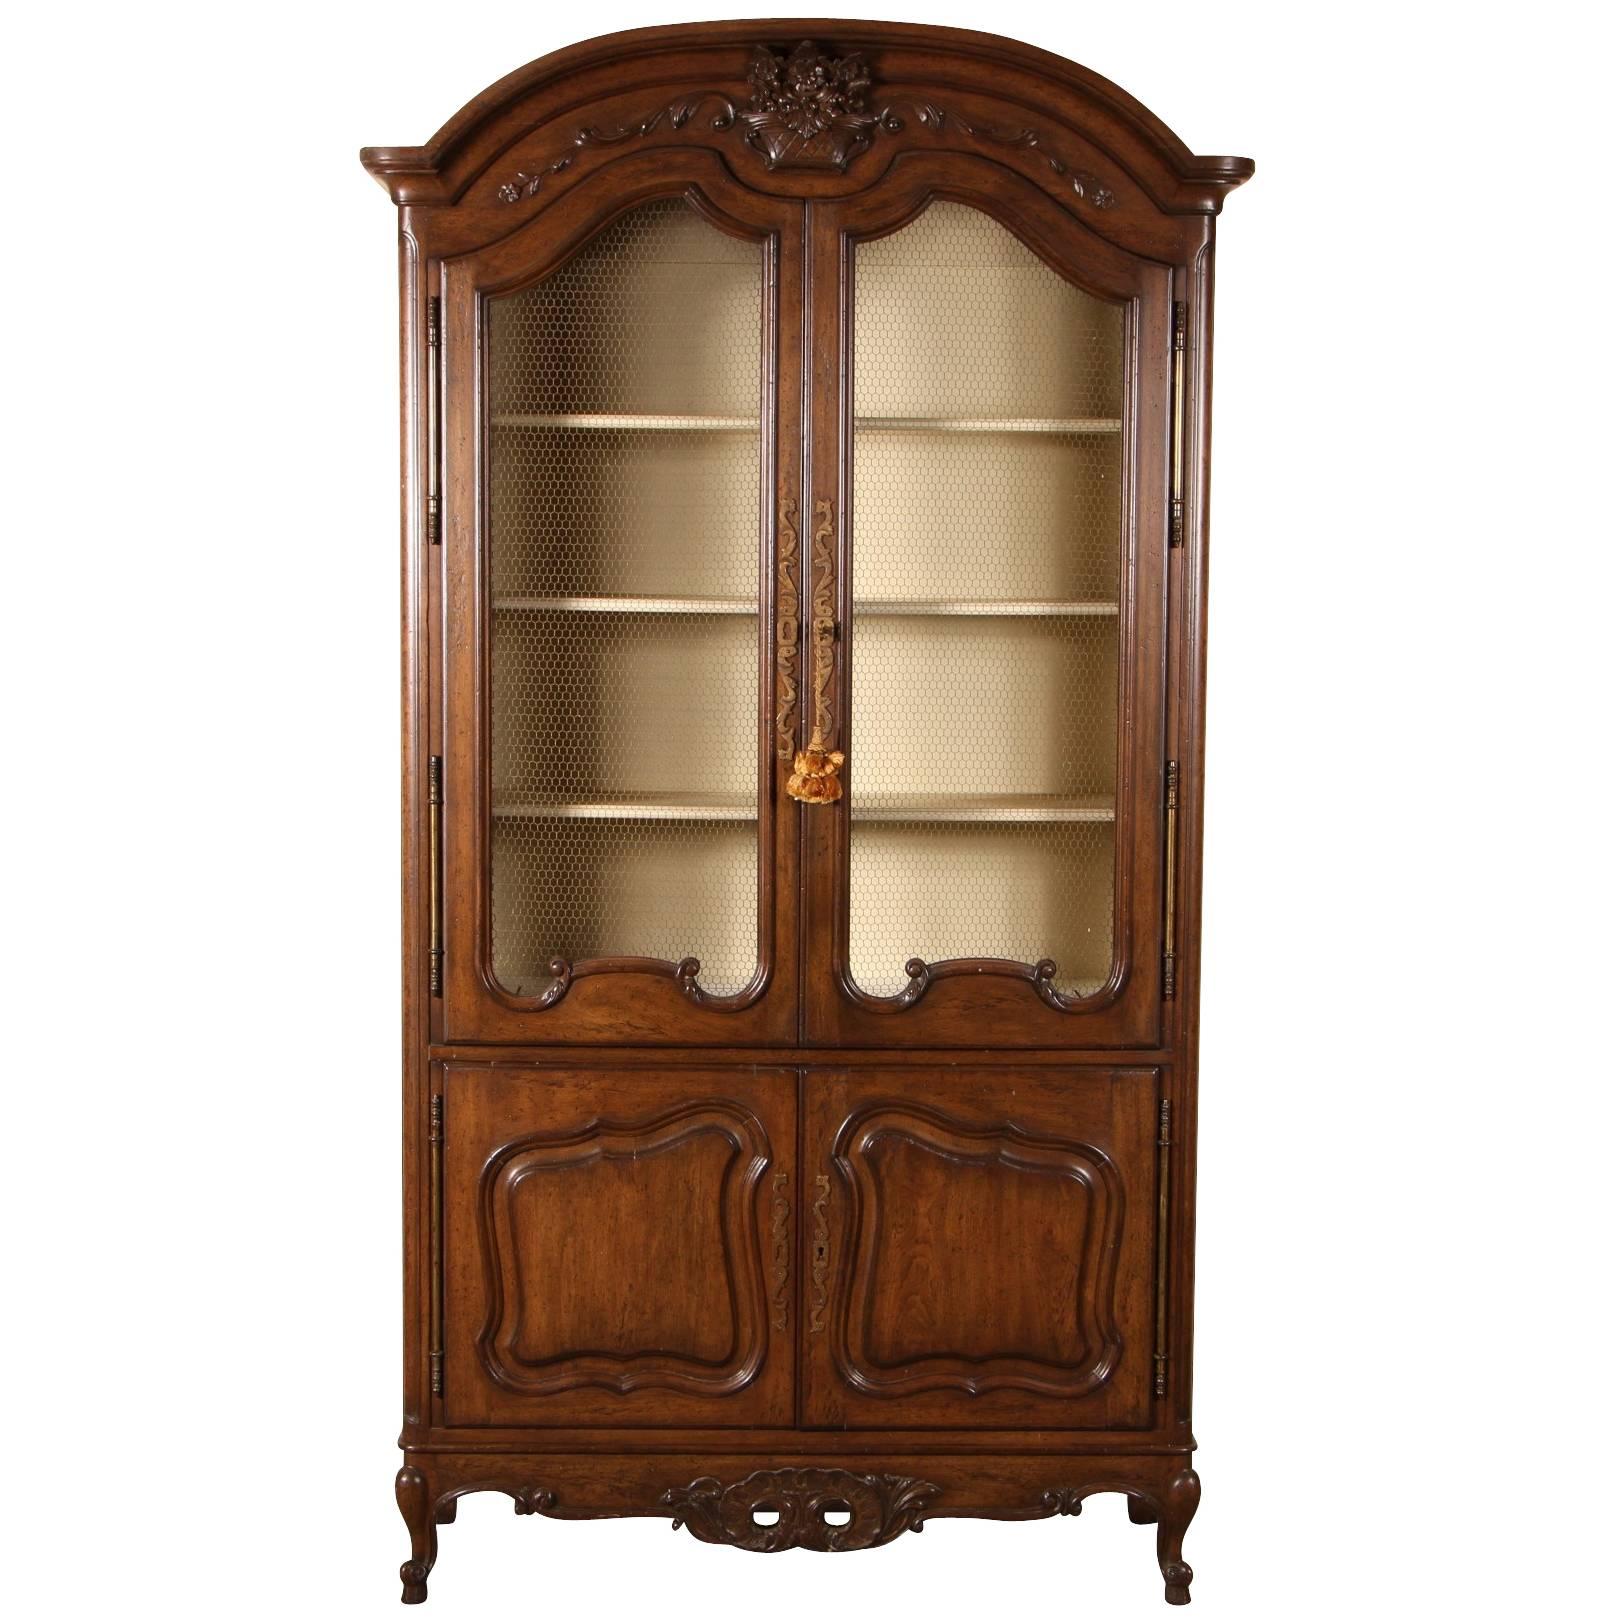 Auffray Country French Bibliotheque or Bar Cabinet